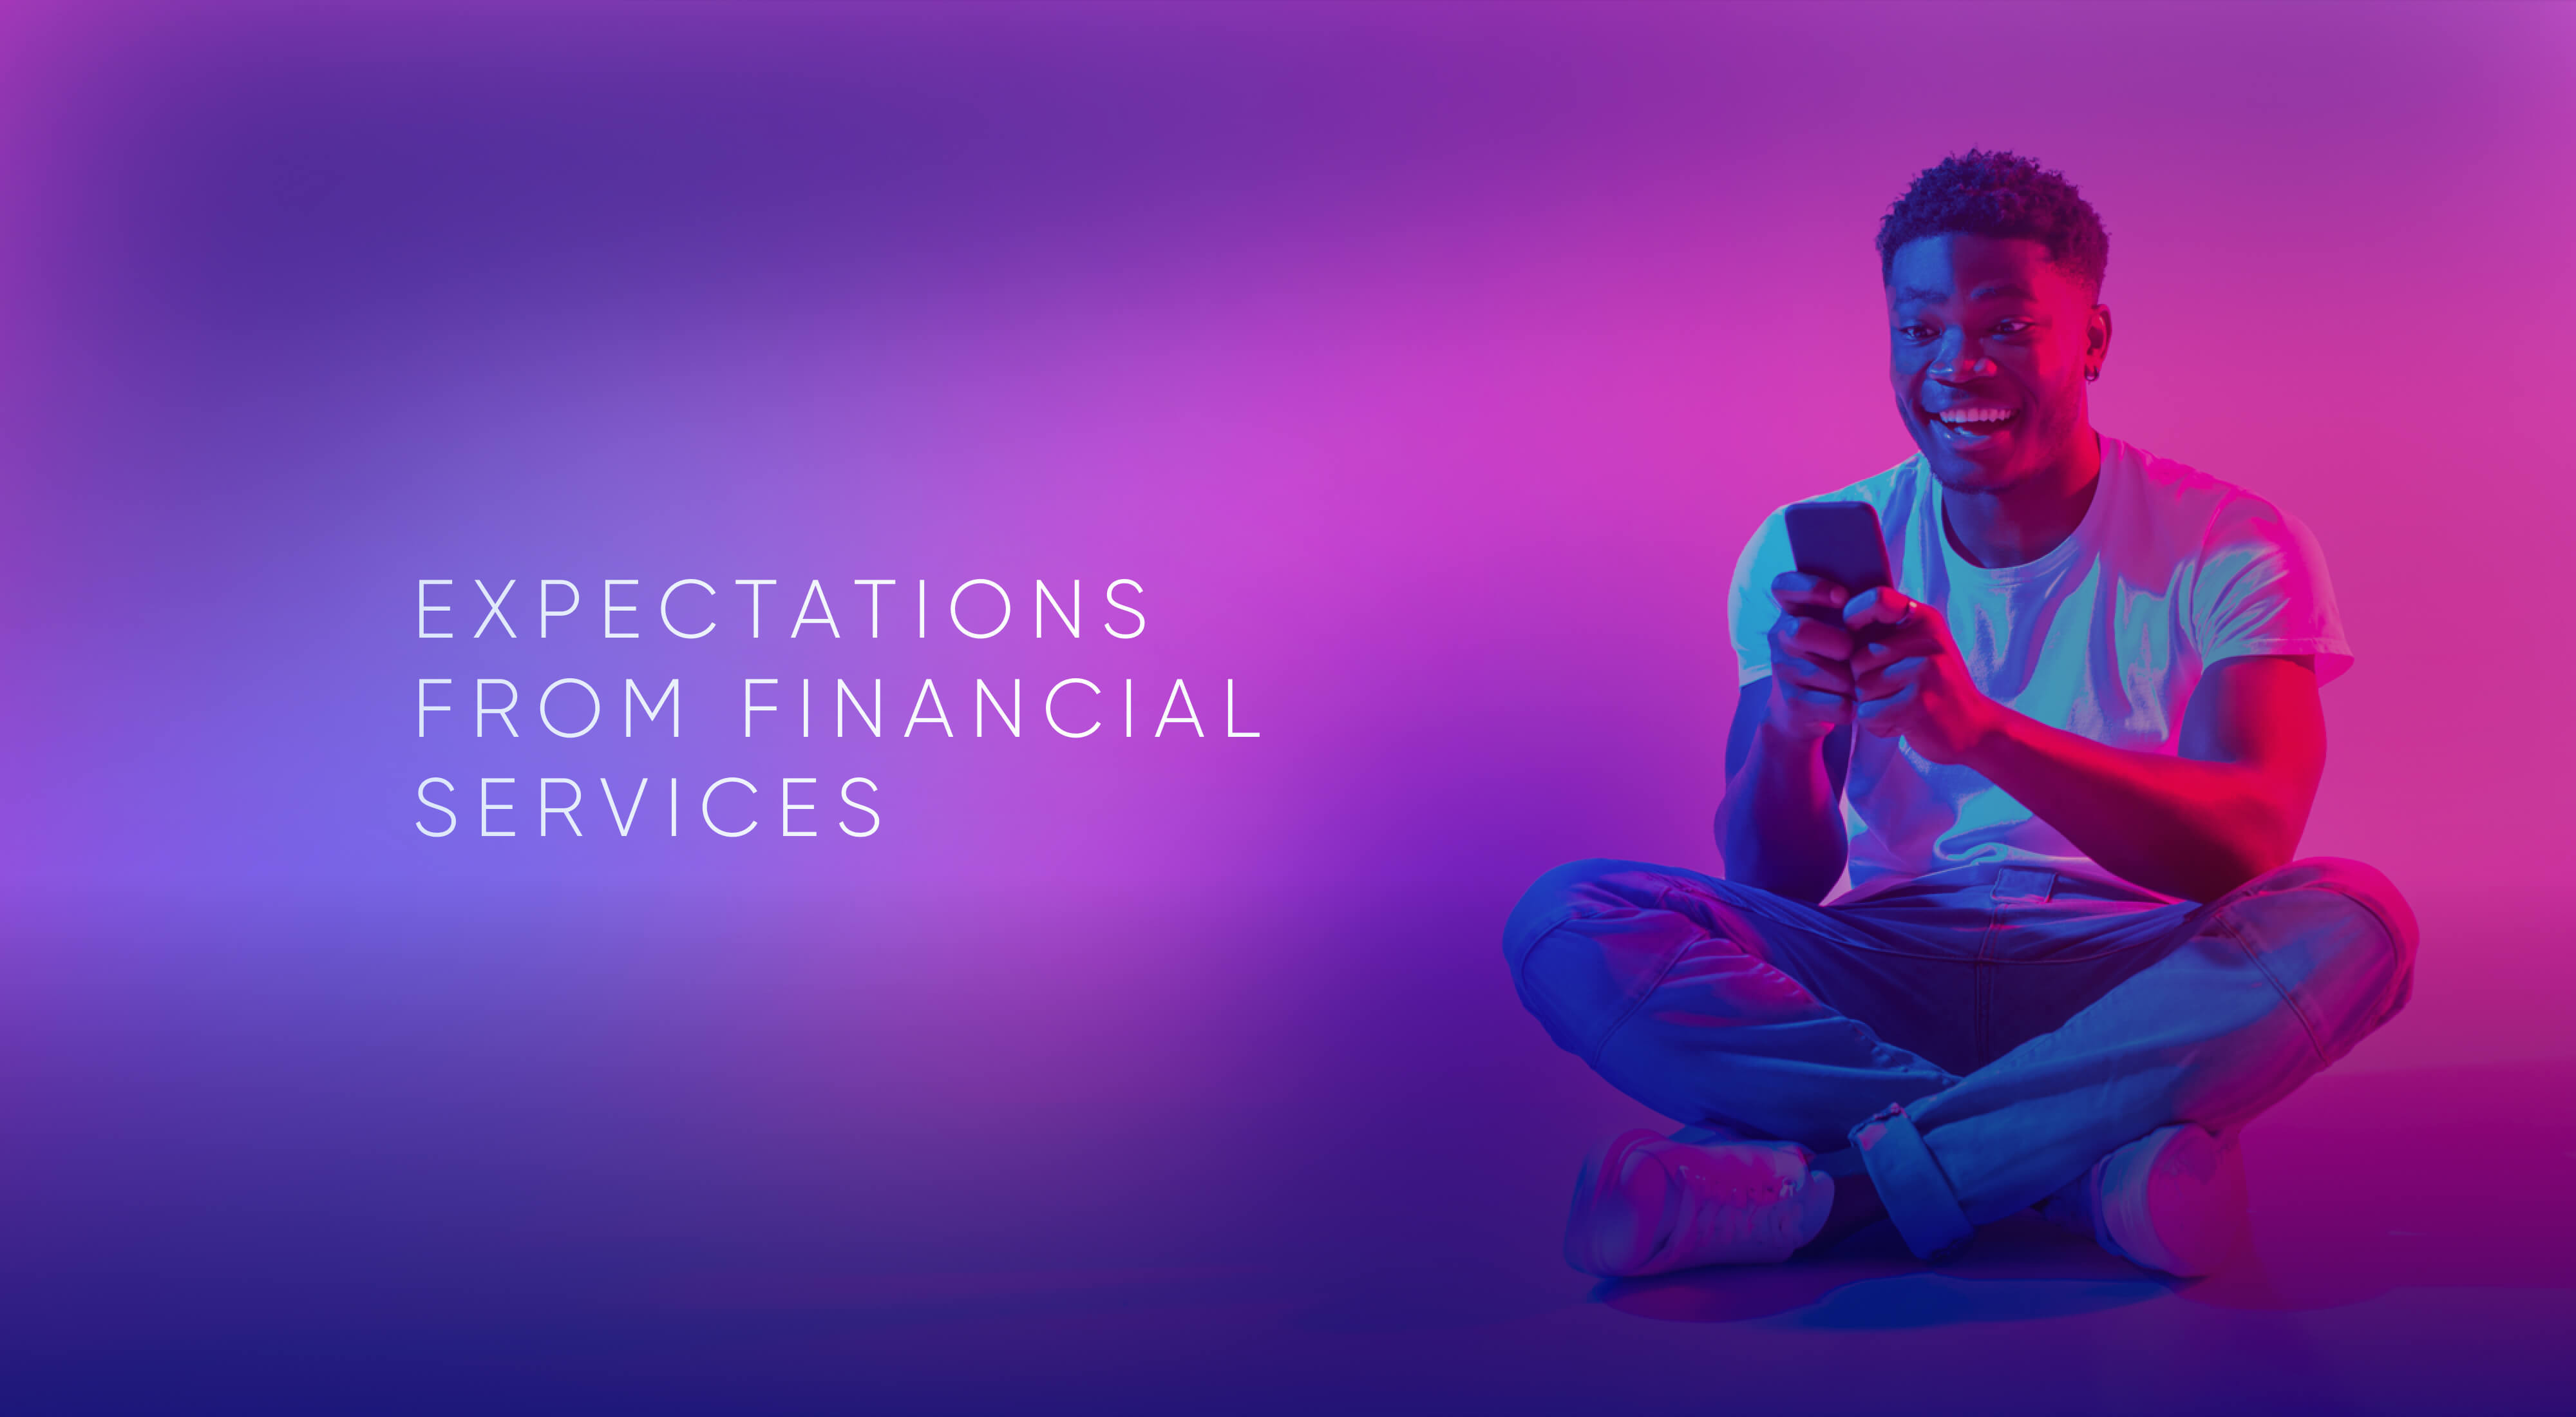 What Are The Digital Banking Customer Expectations From Financial Services